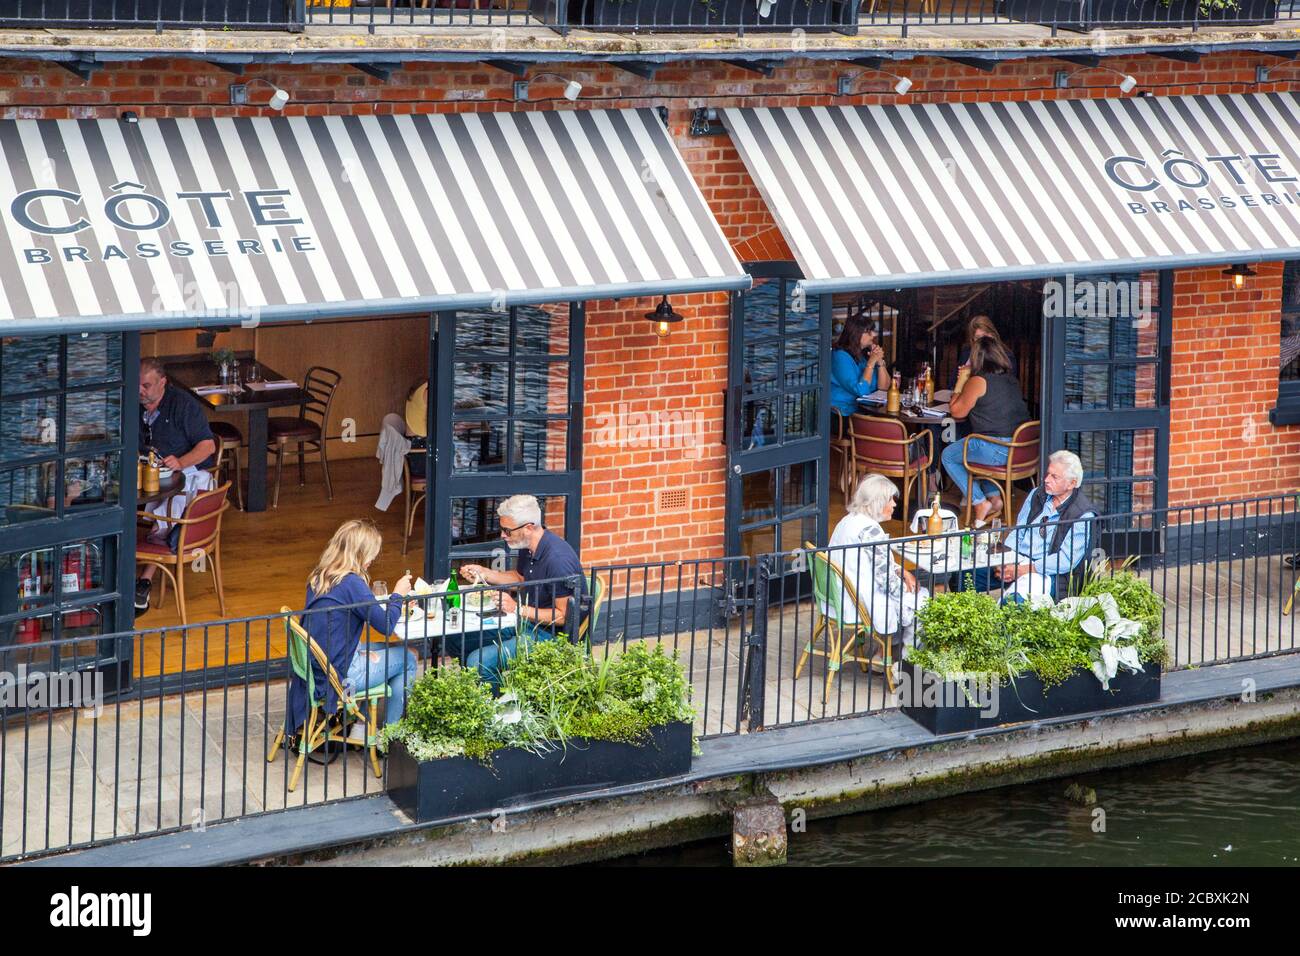 Dinners at the Cote brasserie riverside restaurant eating and drinking outside on the river Thames at Windsor and Eton England UK Stock Photo